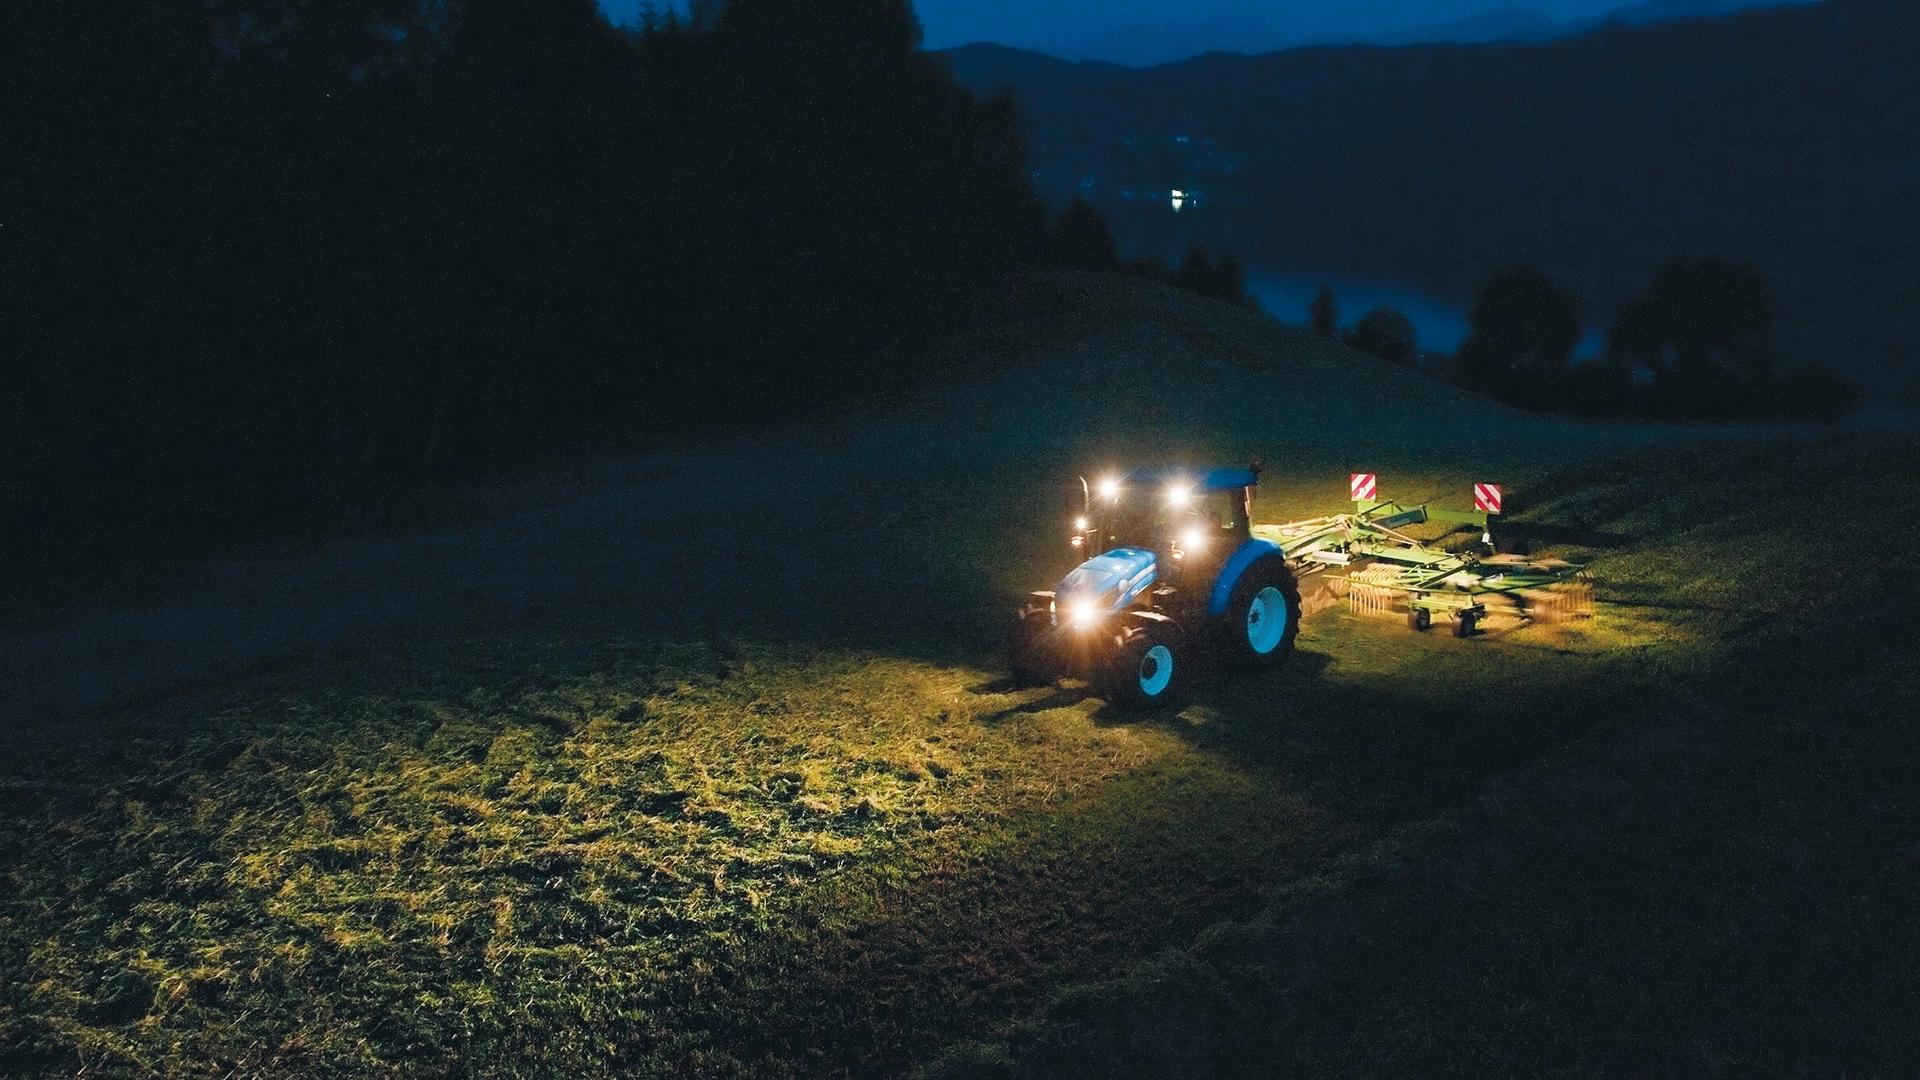 New Holland T4 agricultural tractor actively working on the field